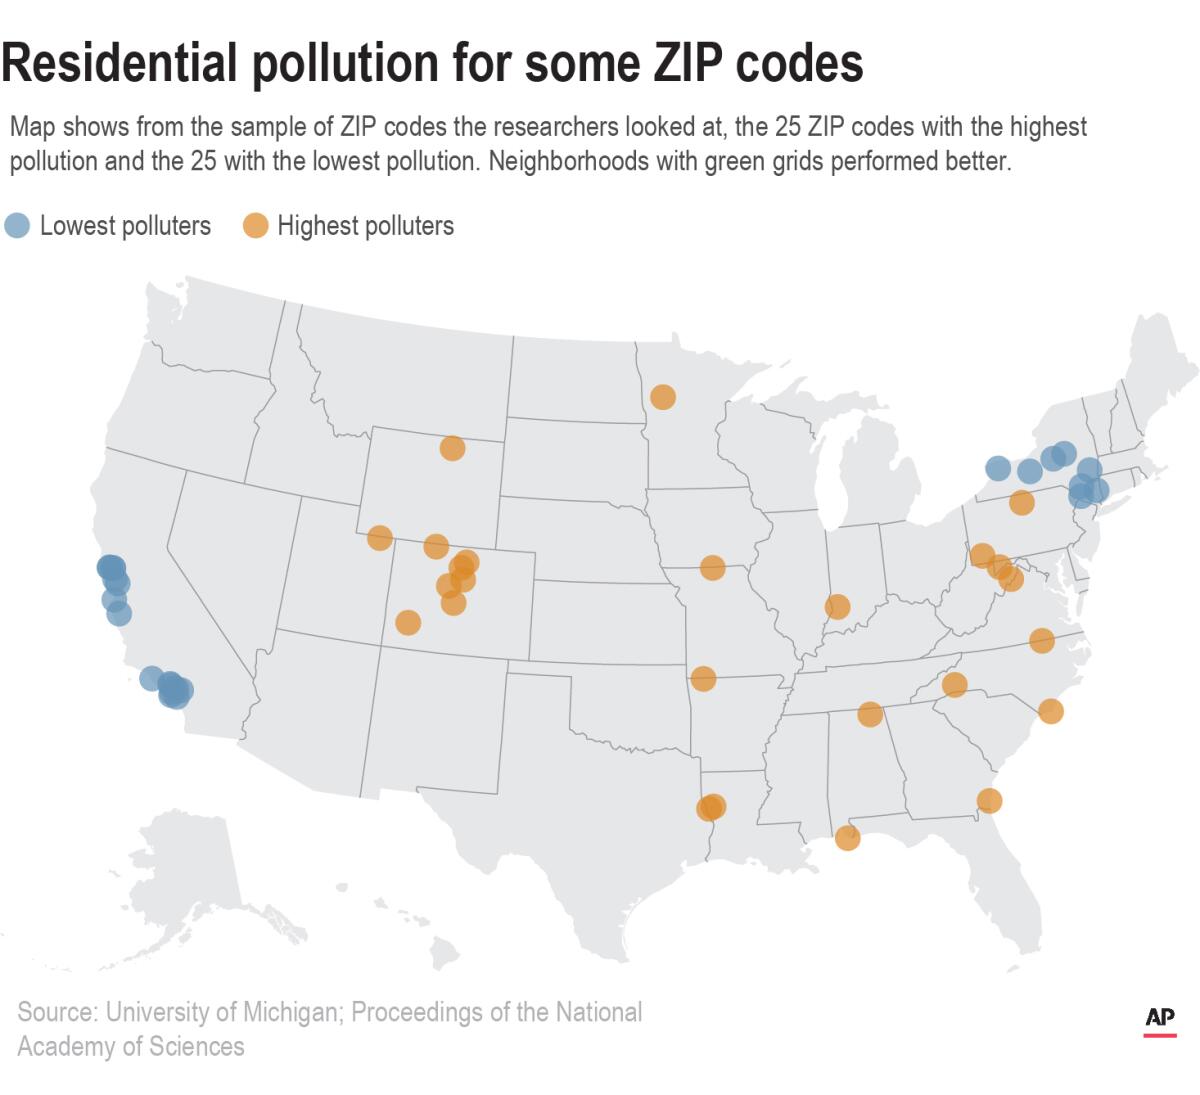 This map shows a sample of ZIP codes with the highest and lowest polluters 